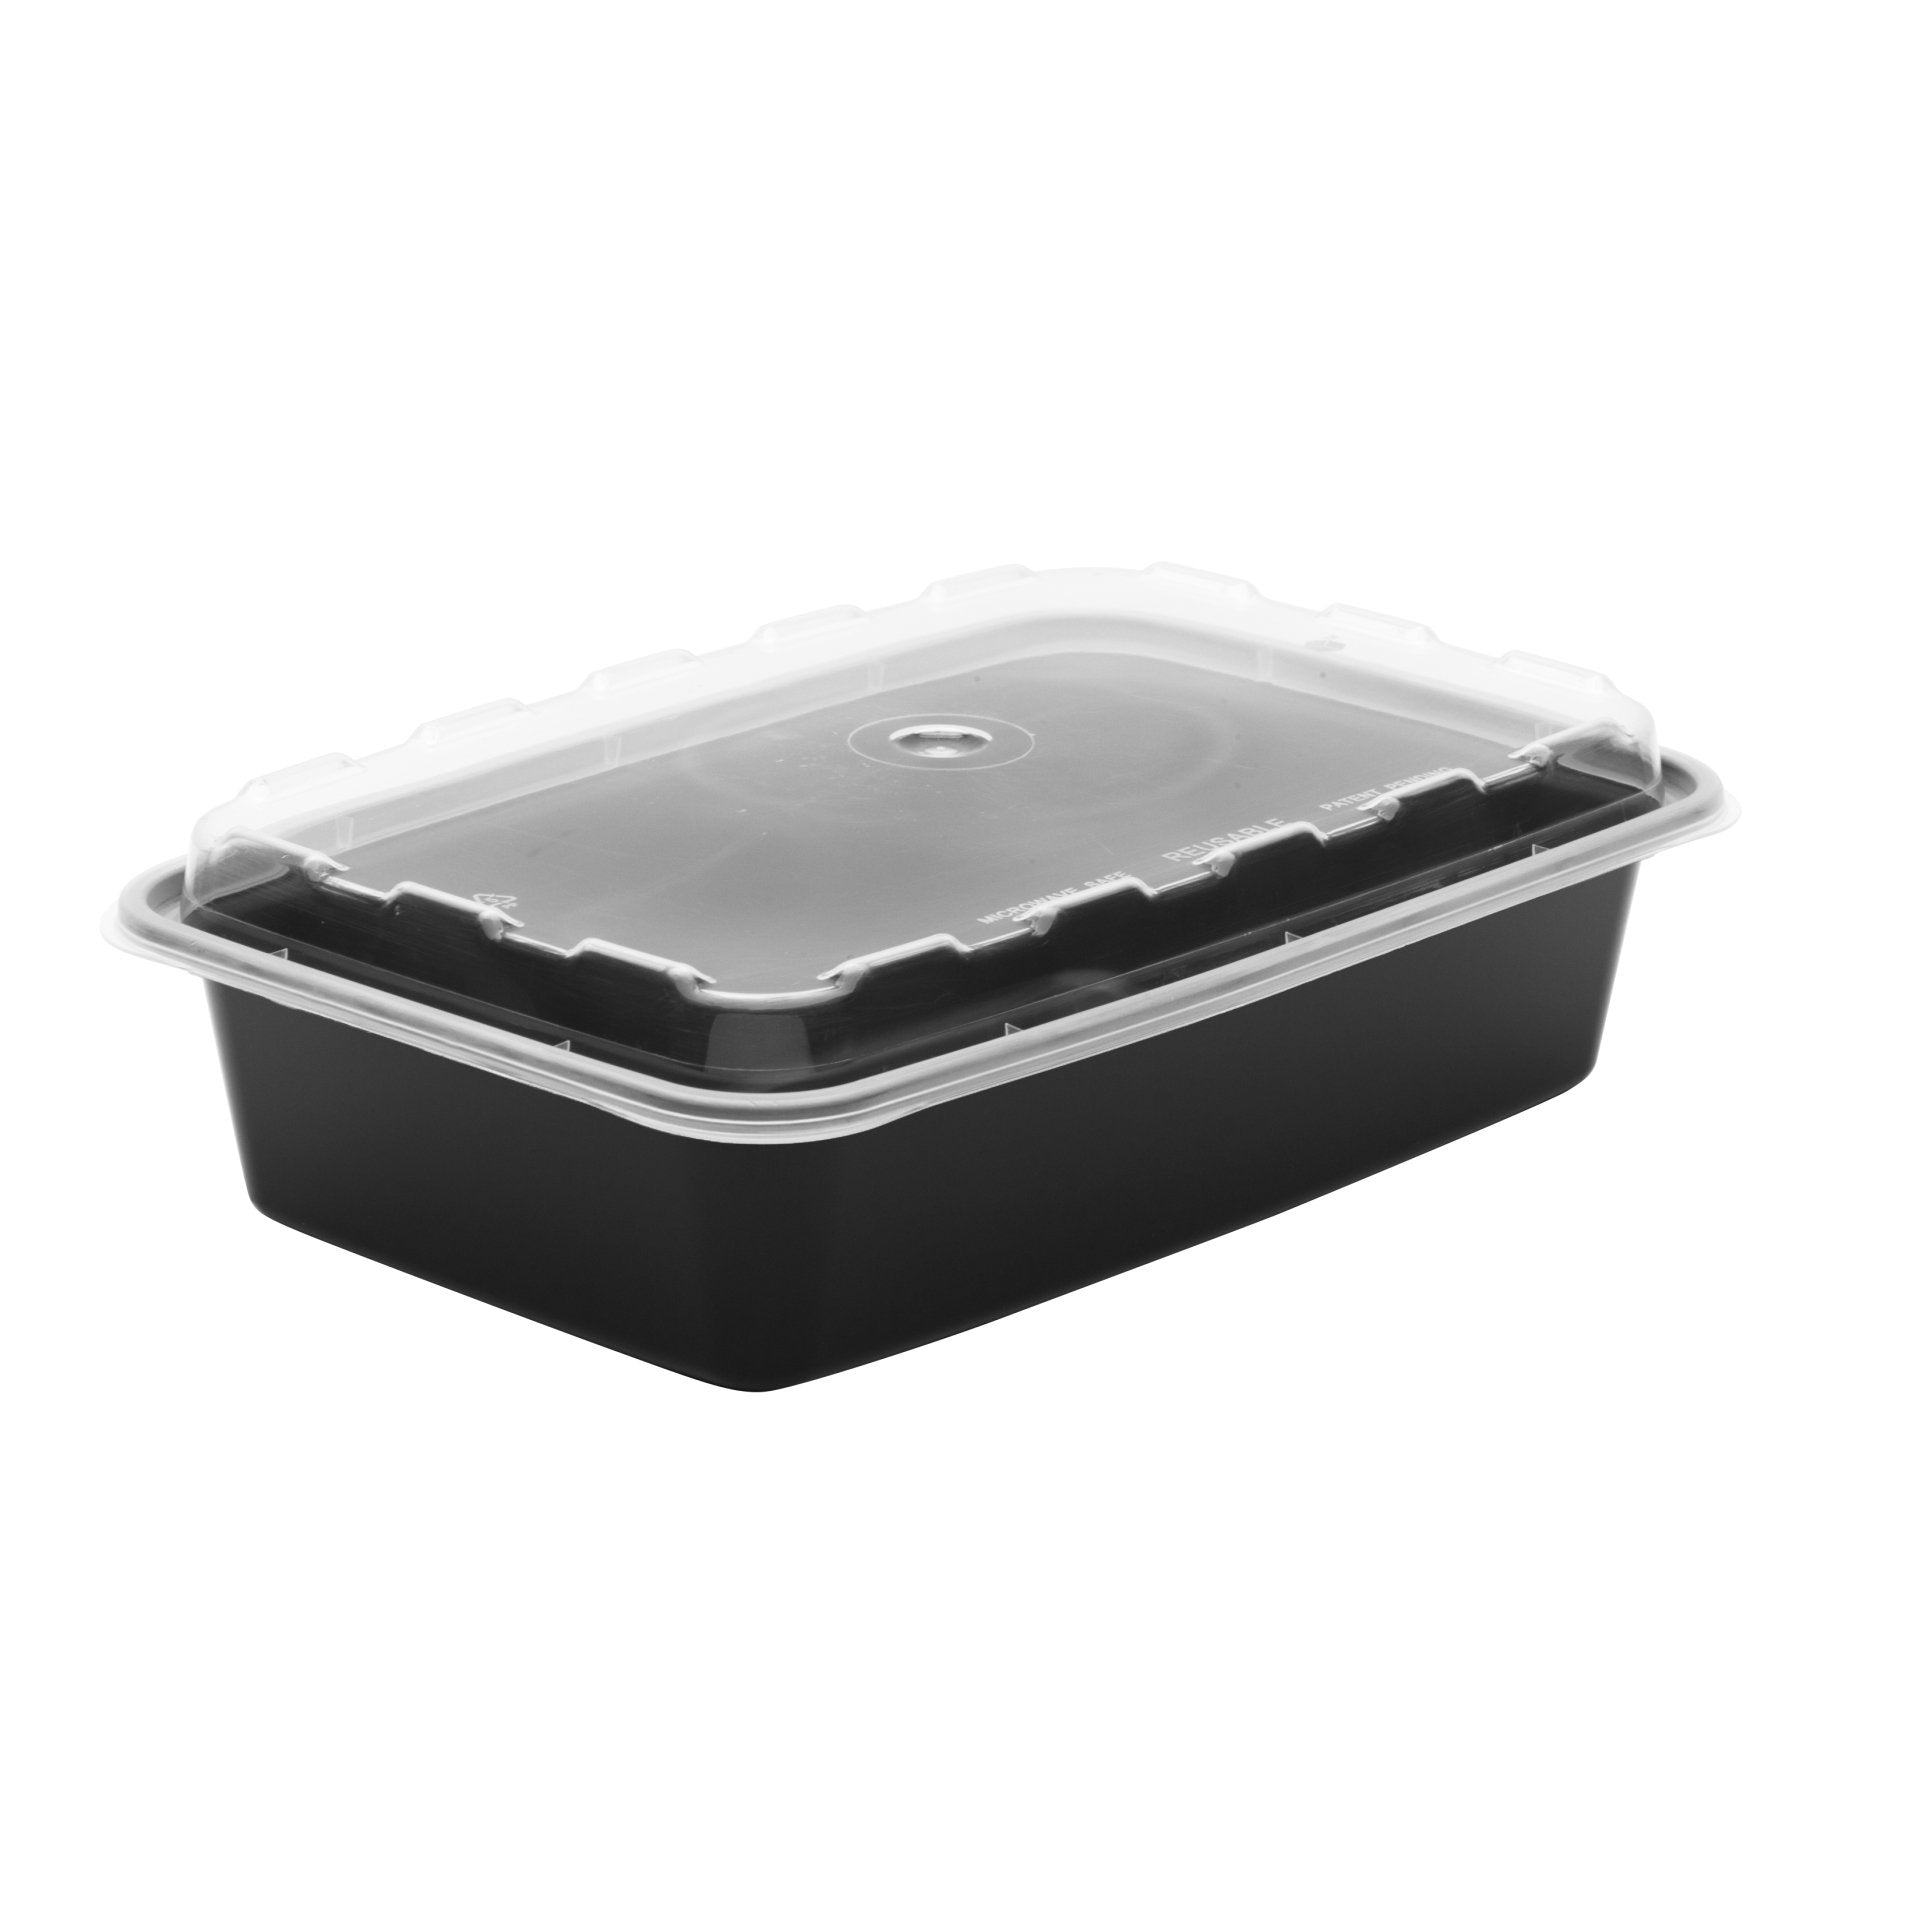 28 oz Rectangular Plastic Disposable Food Containers (50 Pack